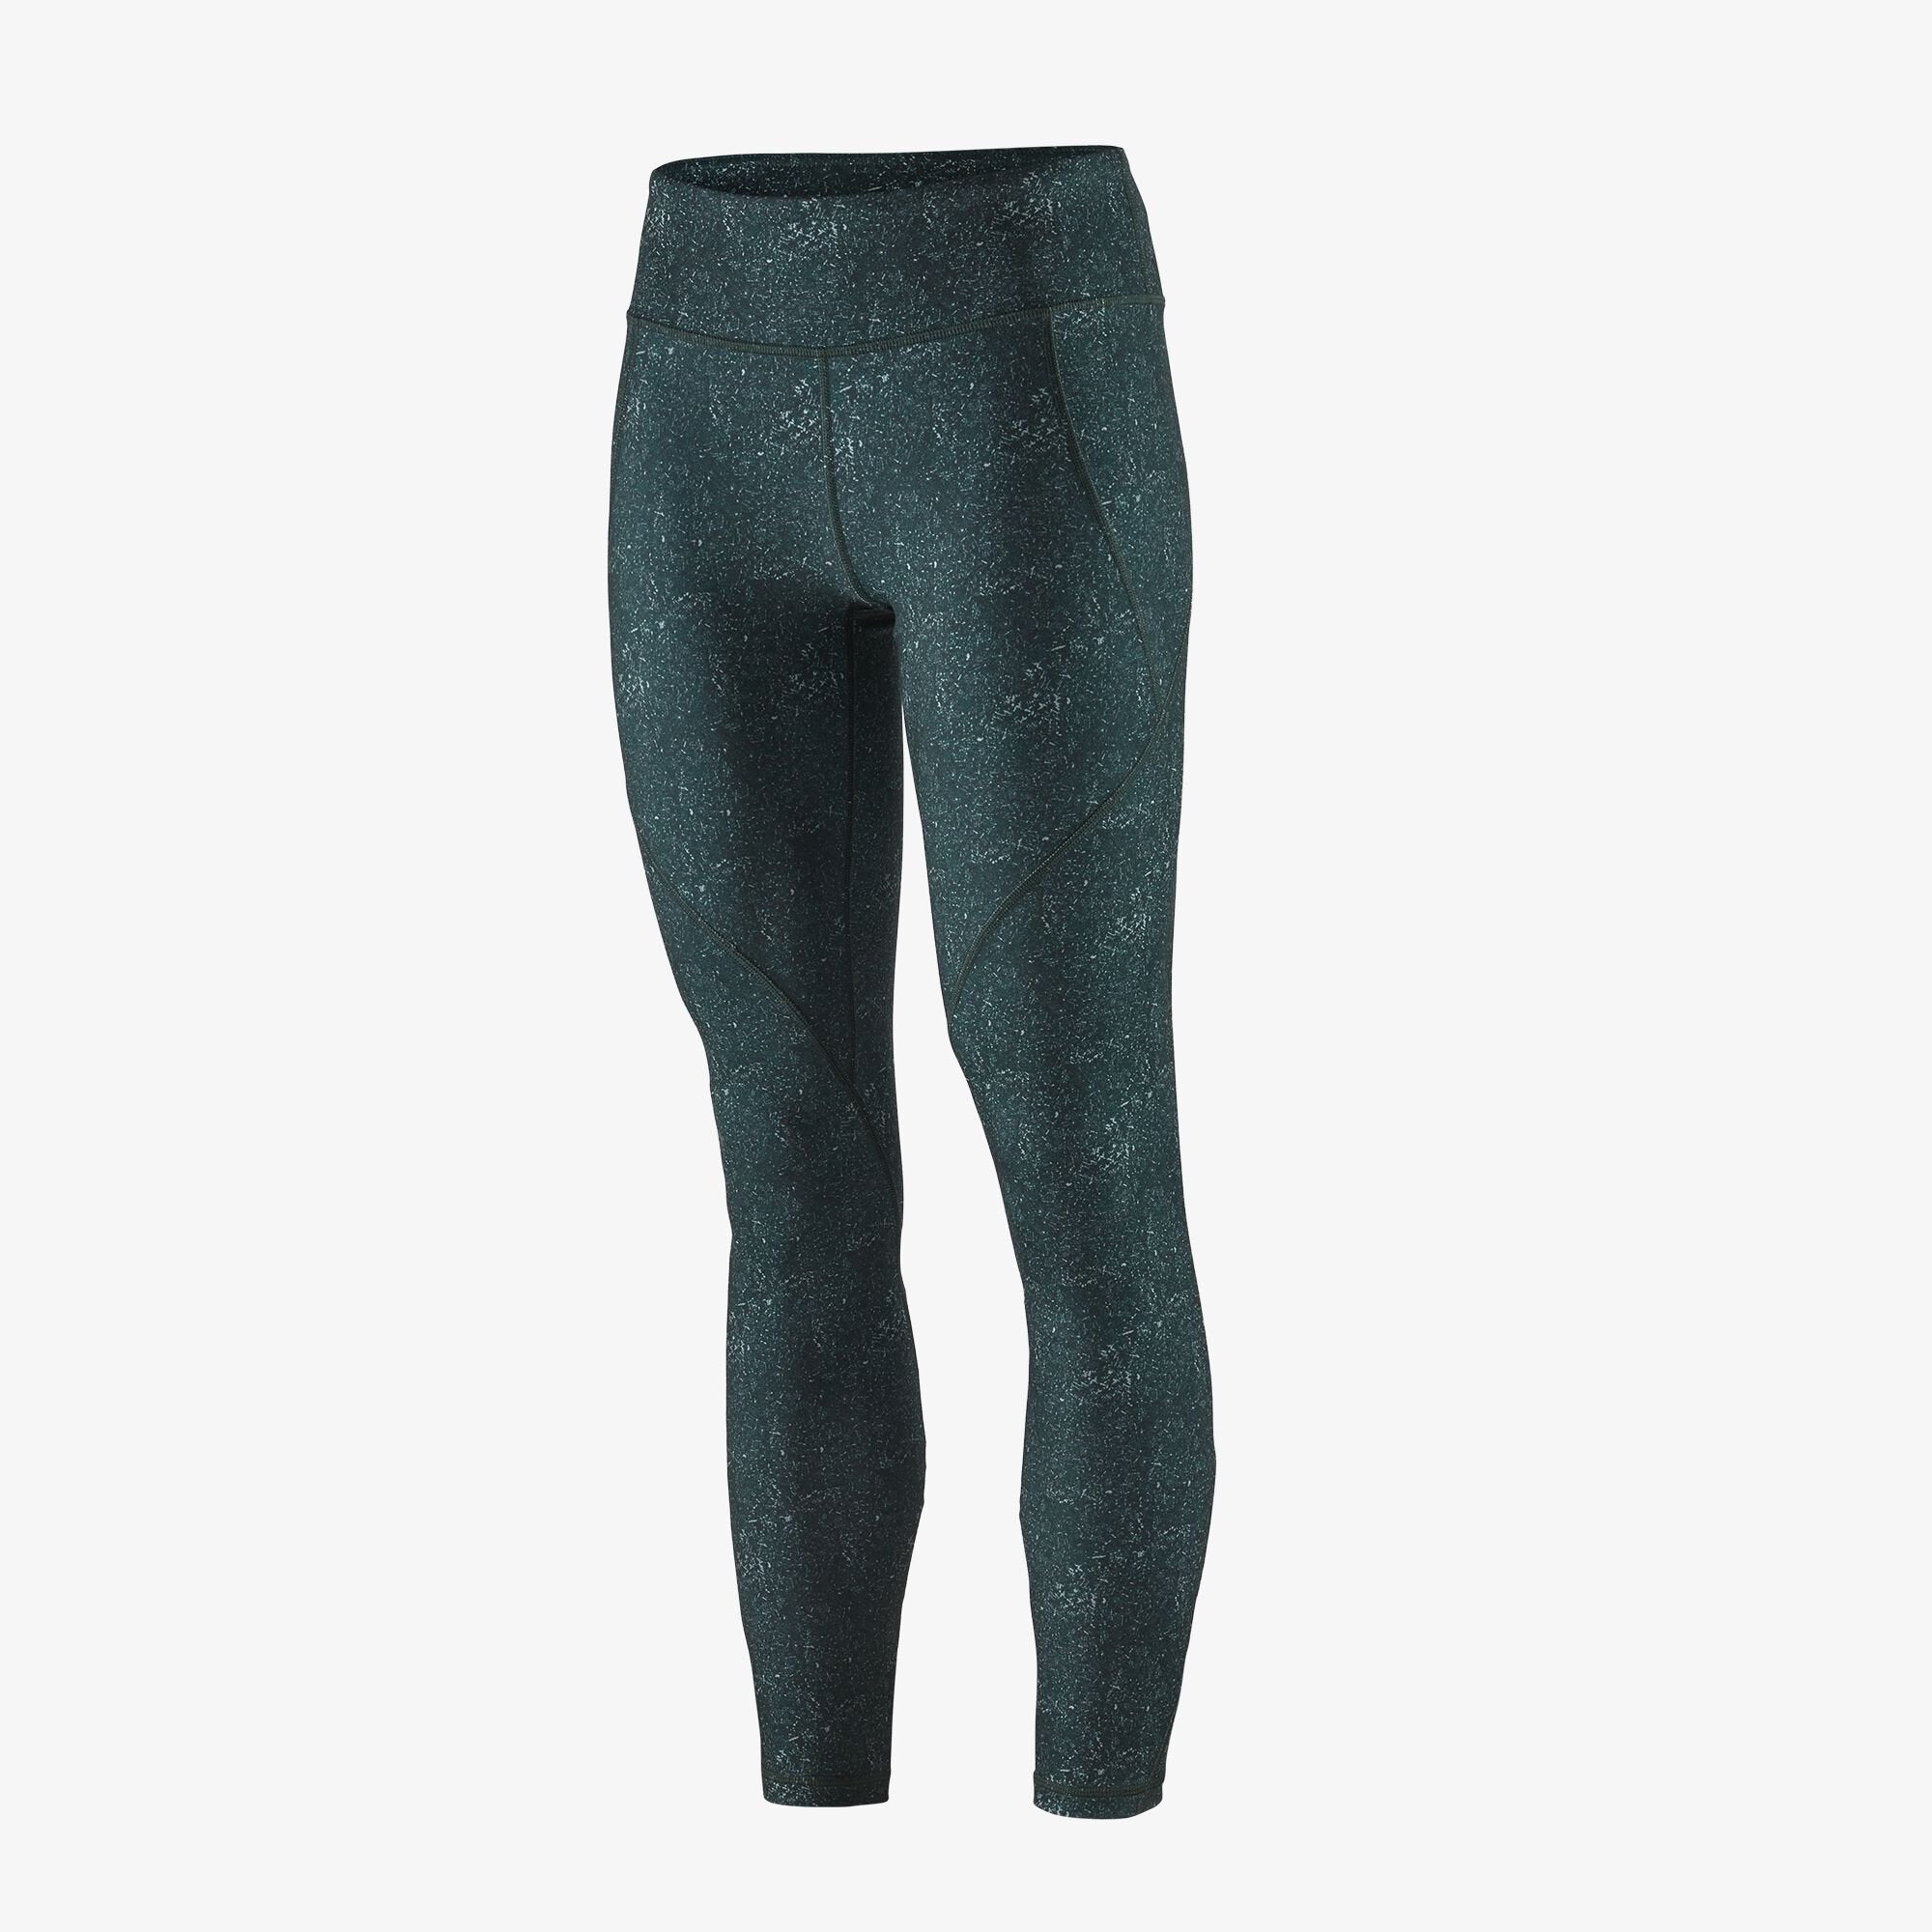 Landmark  Patagonia Centered Tights in Cosmic Carving:Northern Green